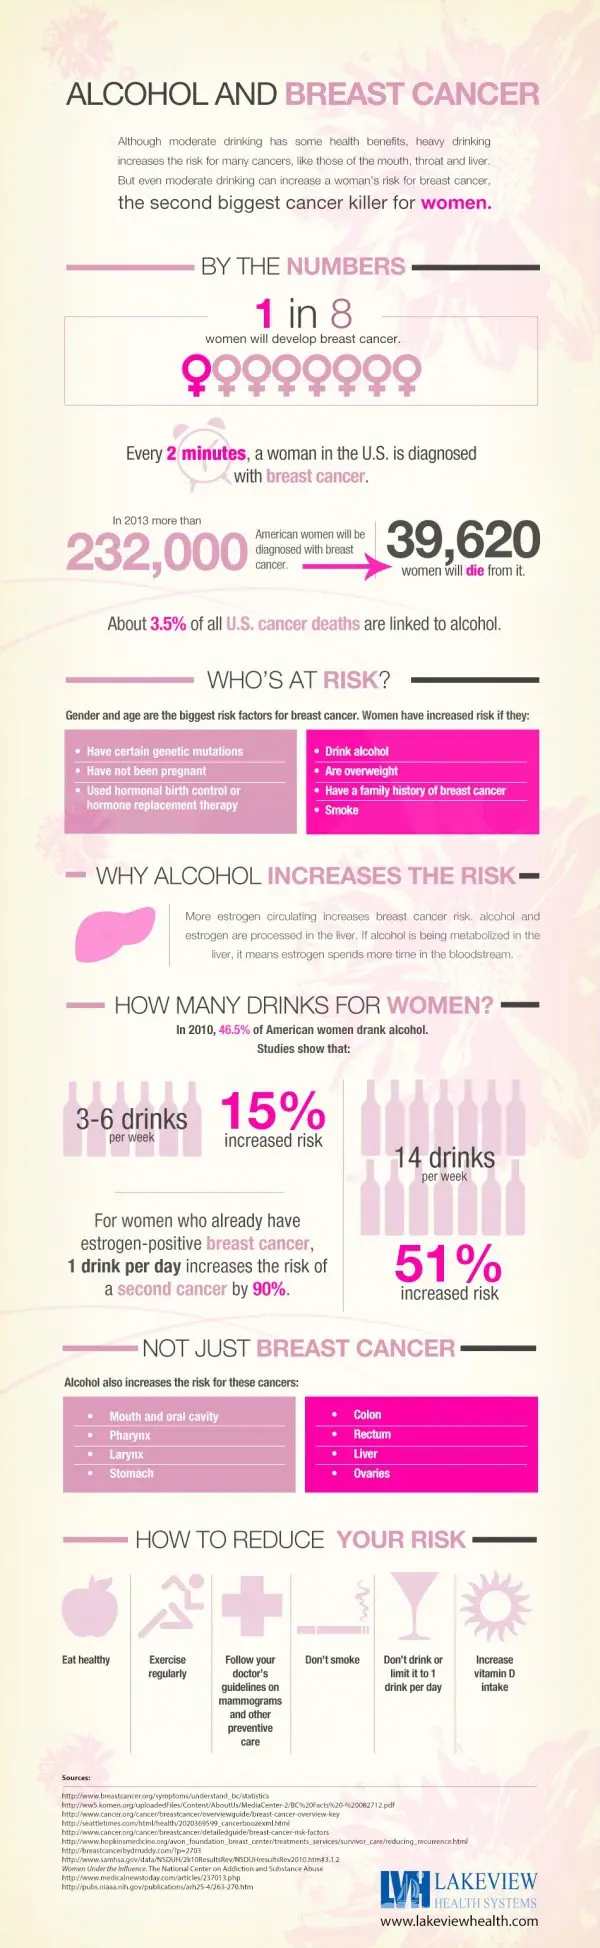 Alcohol and Increased Breast Cancer Risk